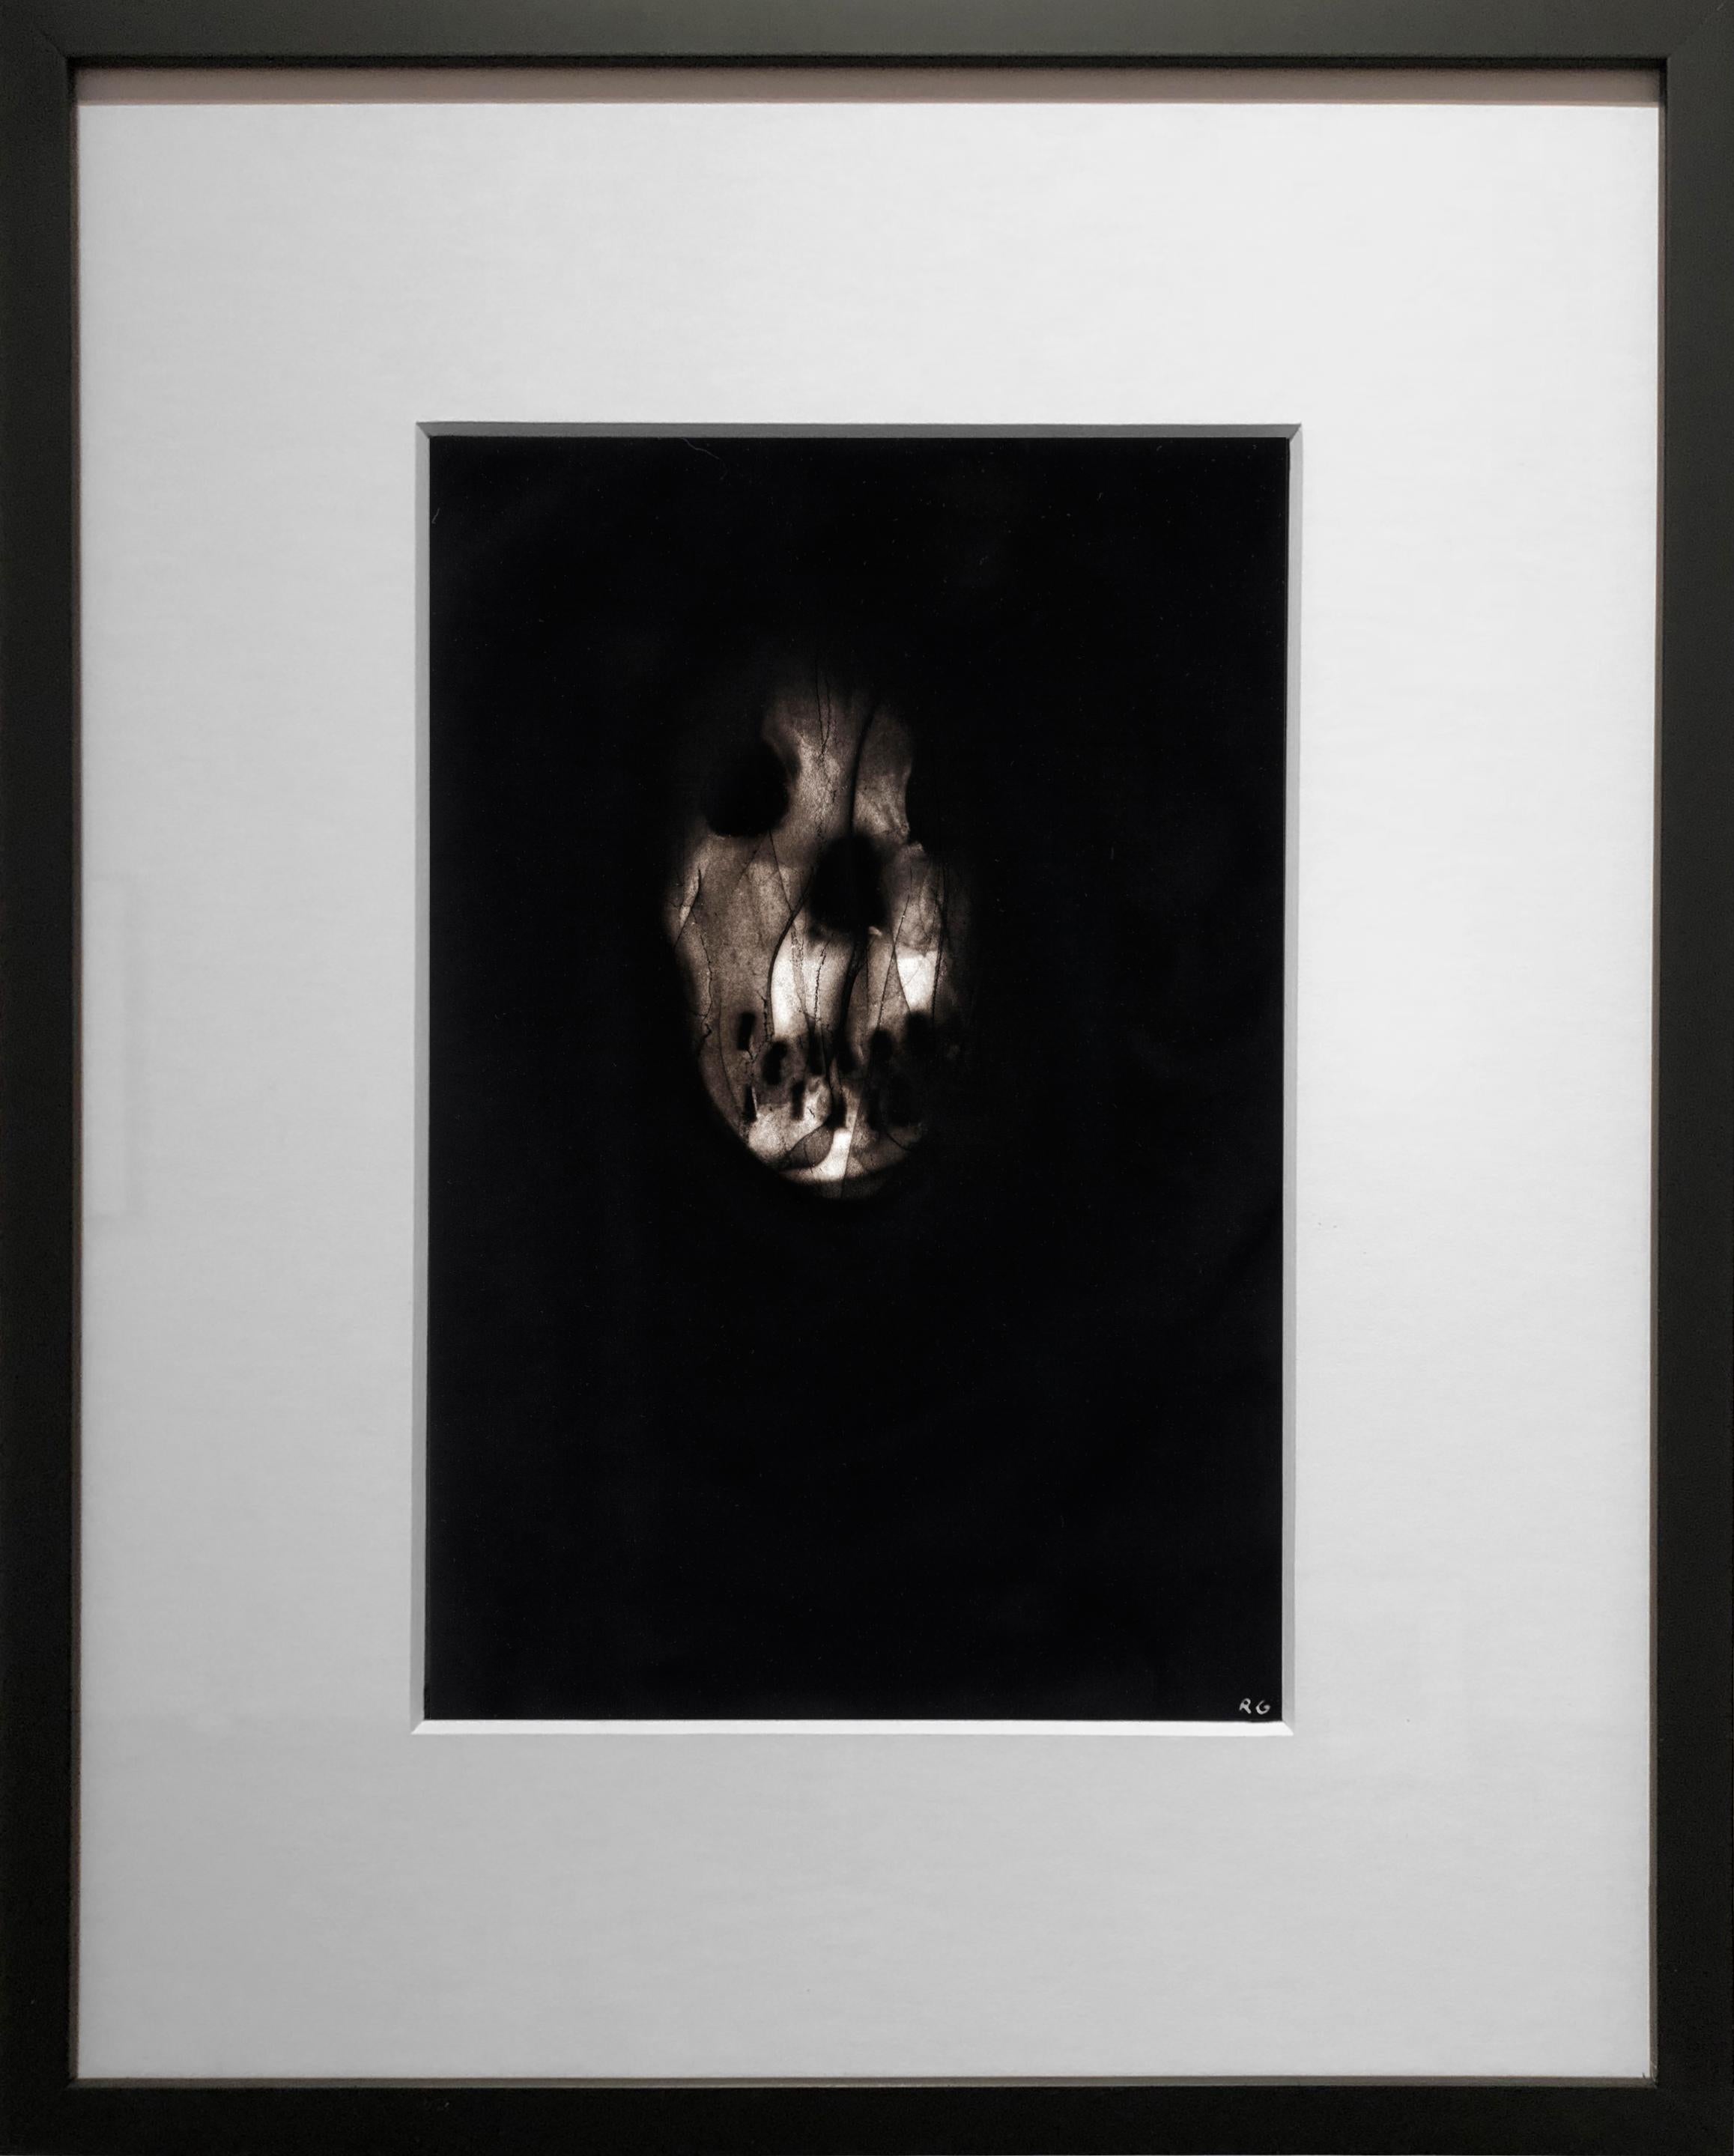 Triptych 3 is a black flame drawing on paper. The artist uses a flame from a torch with precise speed and distance from the paper, which leaves carbon deposits behind in varying degrees of value and rich velvety blacks. The process provides a